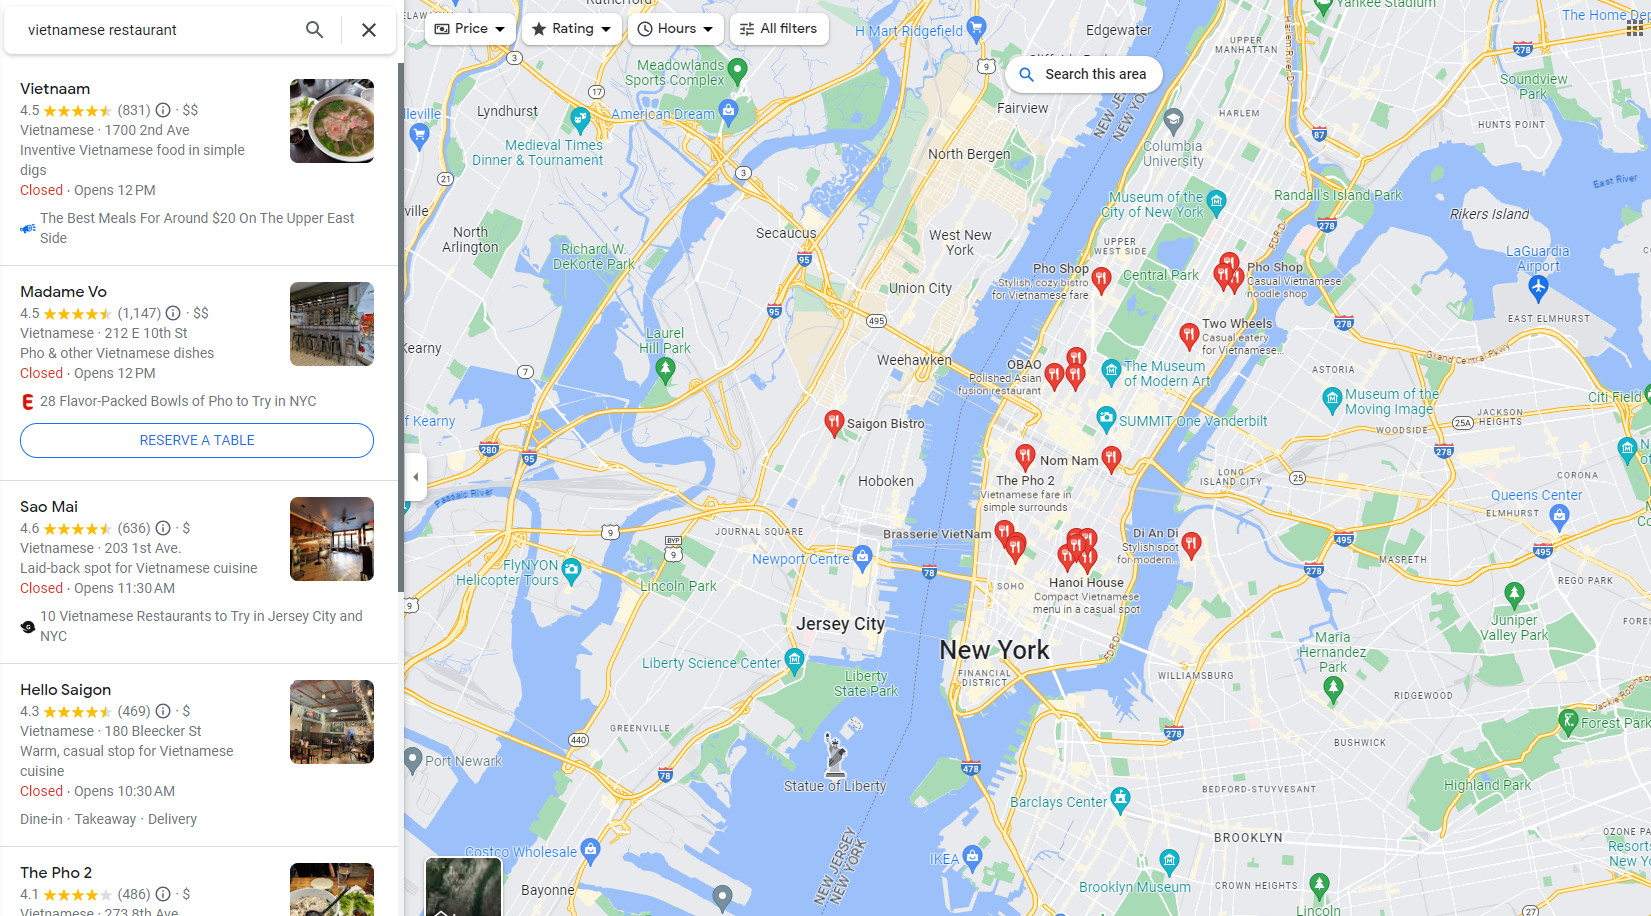 Each Google restaurant review is visible on the Google Maps section